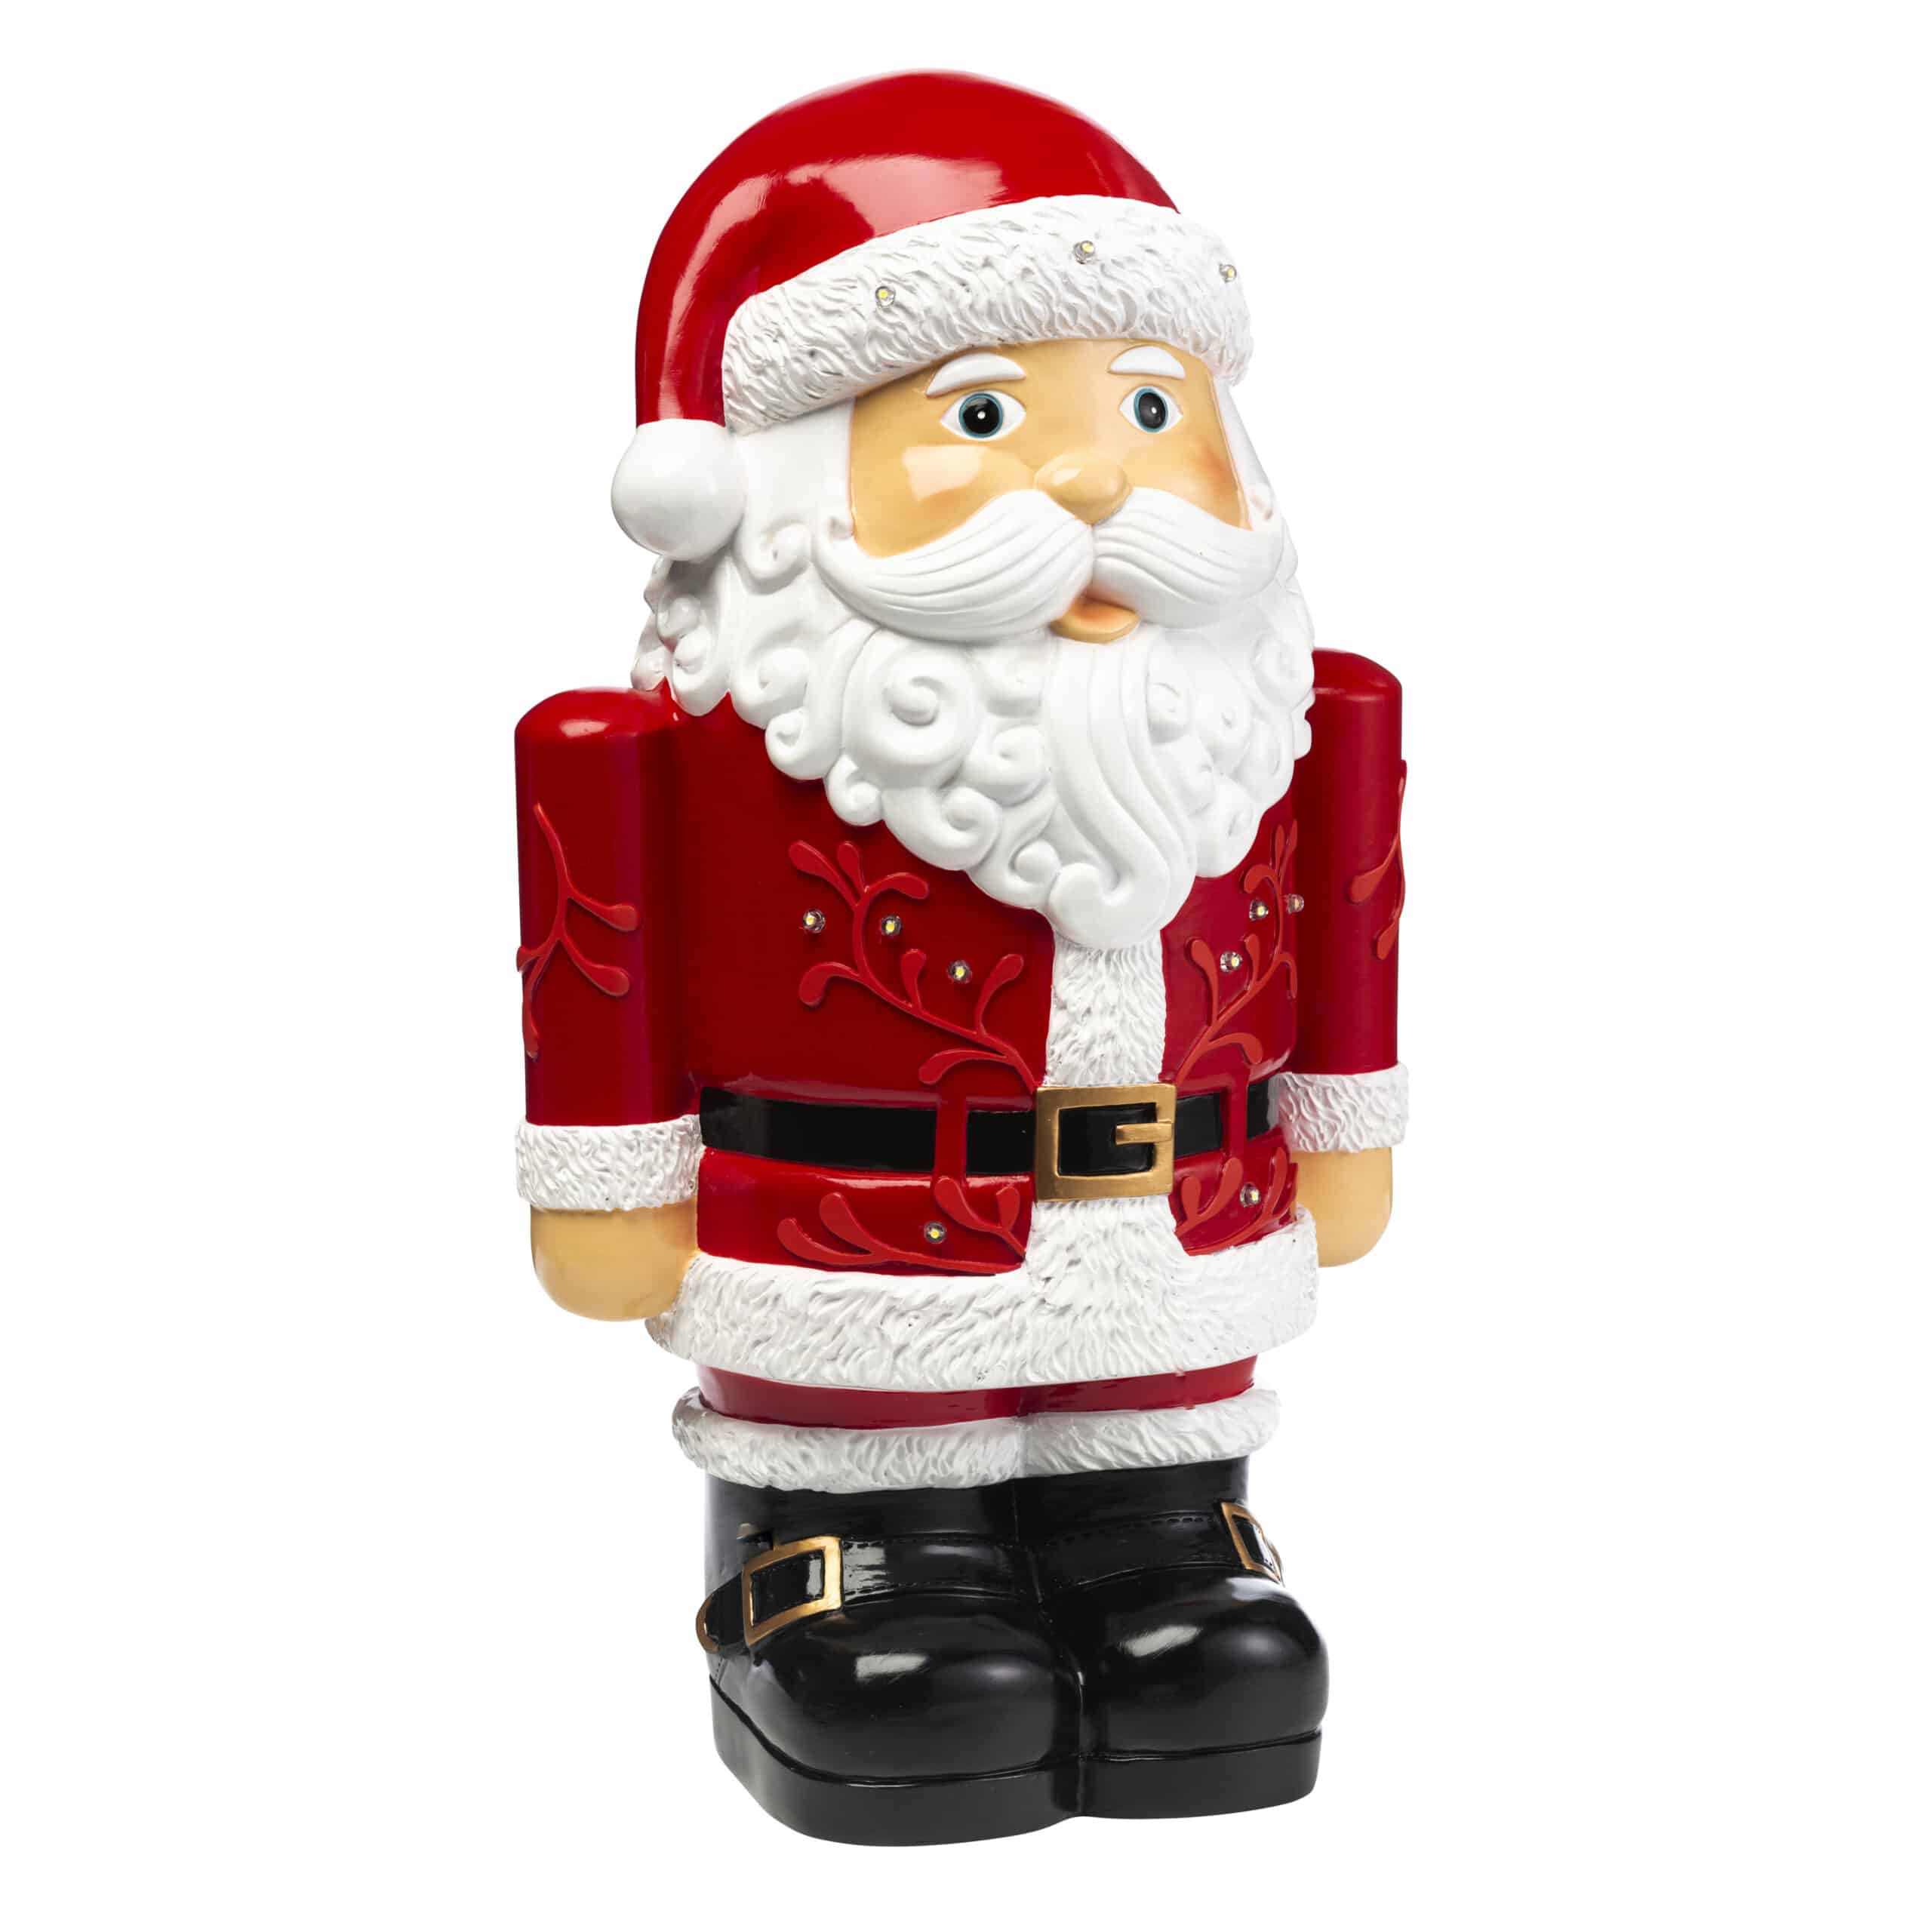 Lighted Santa Clause Shorty Statue image